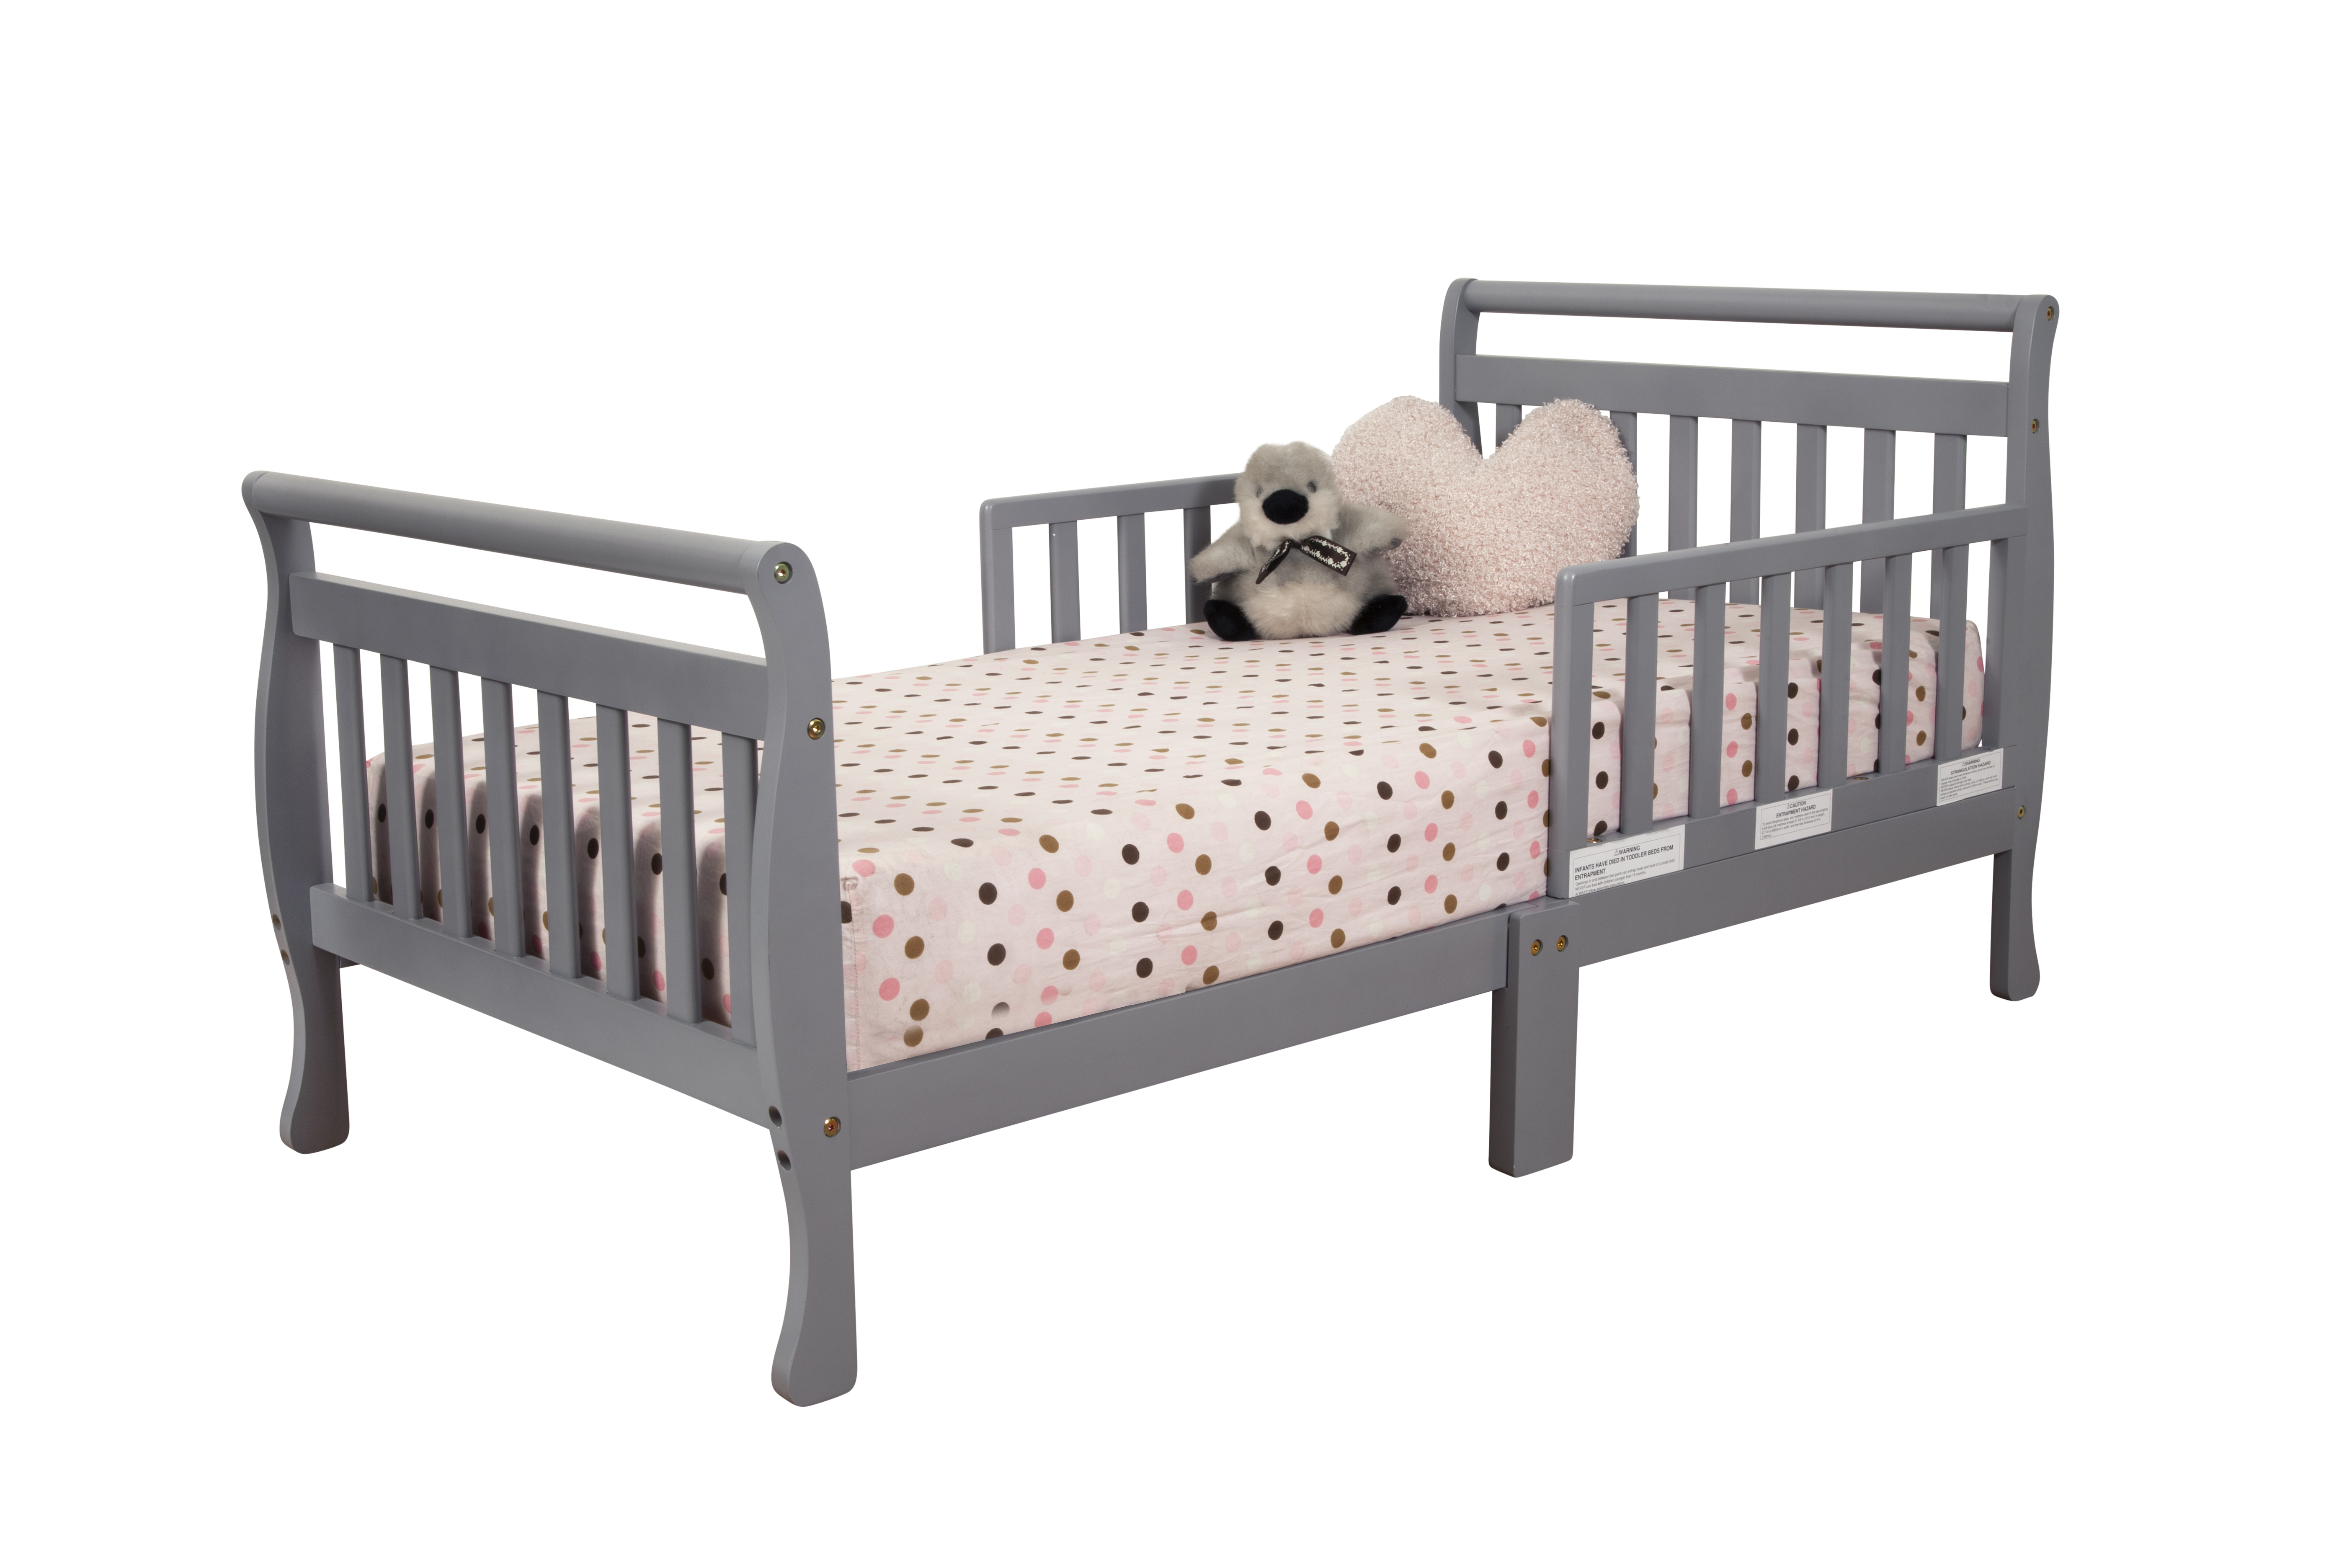 Athena Classic Sleigh Toddler Bed, Gray - image 4 of 4